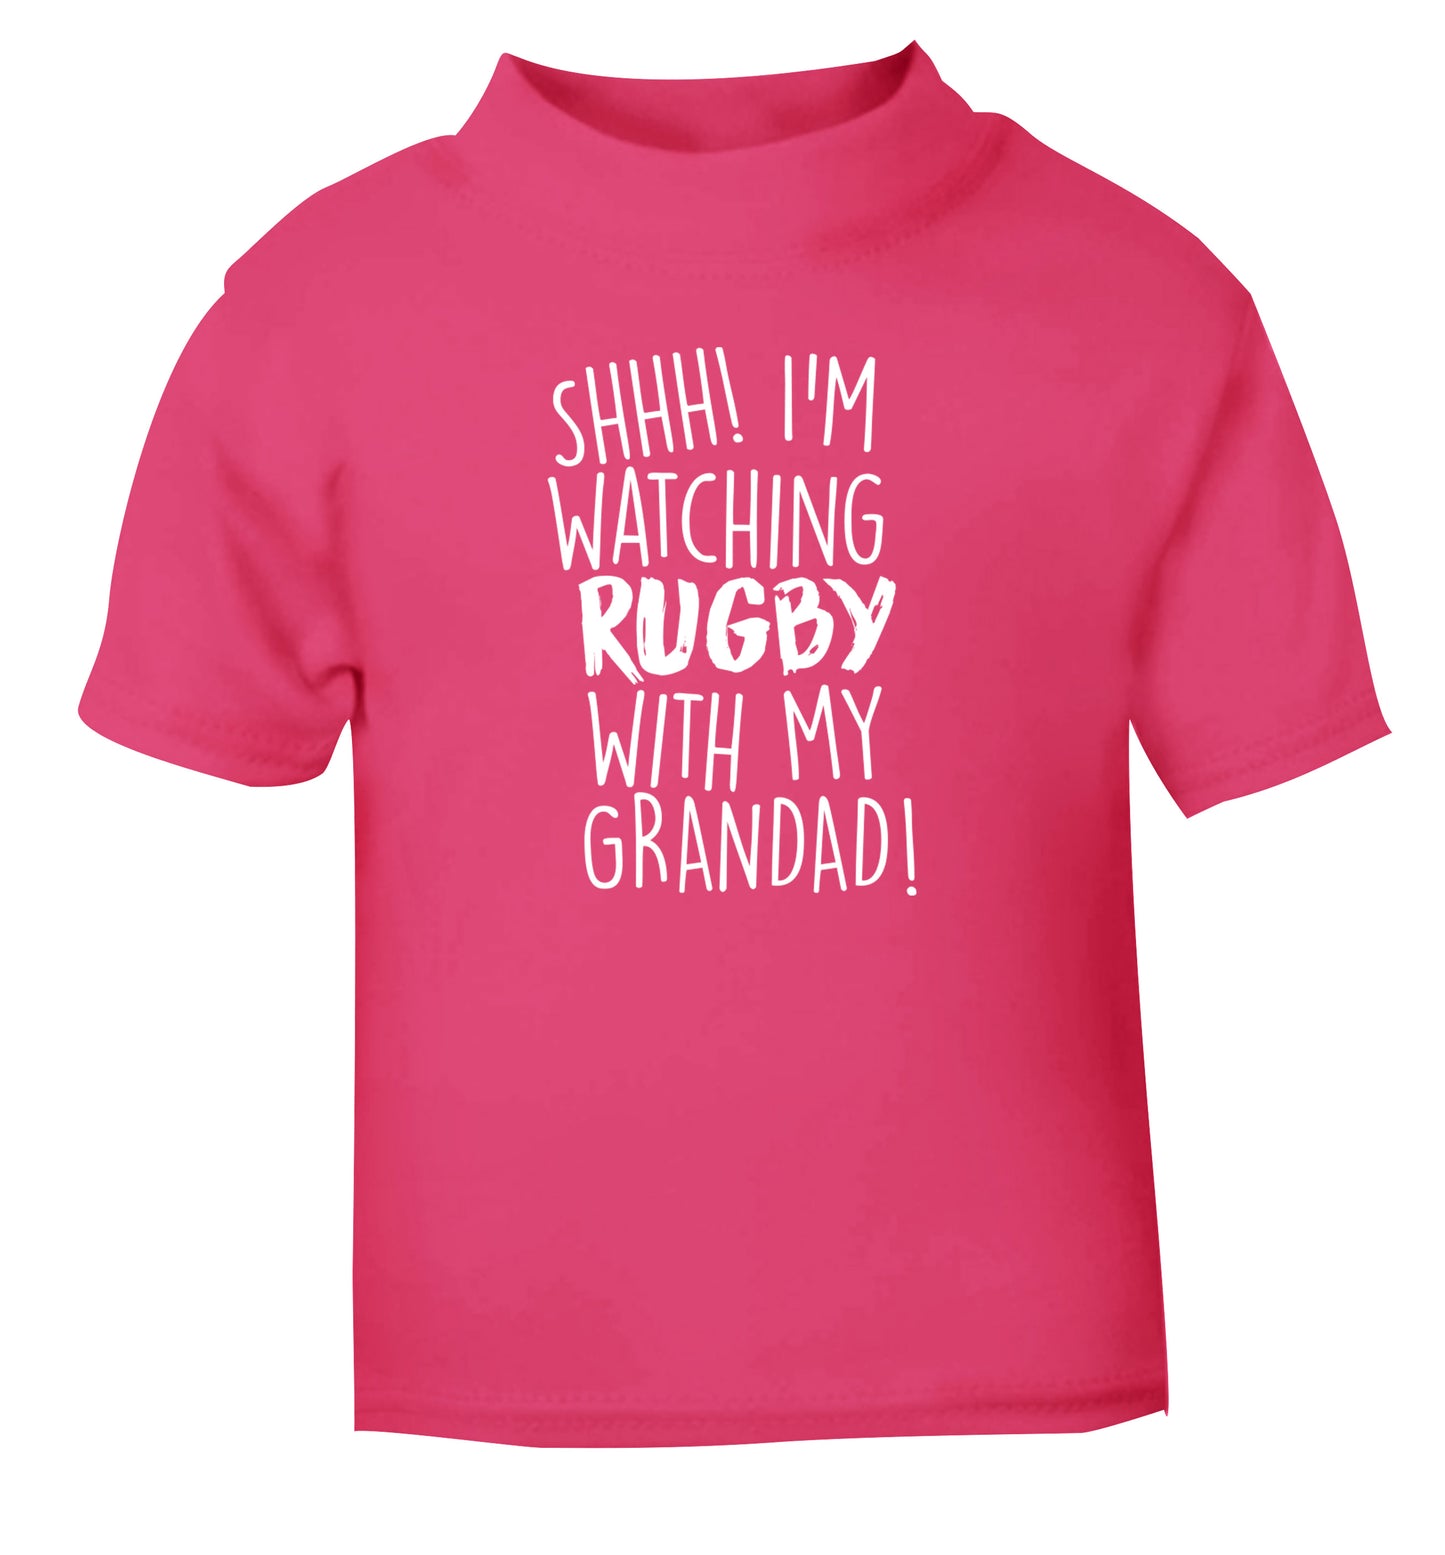 Shh I'm watching rugby with my grandad pink Baby Toddler Tshirt 2 Years